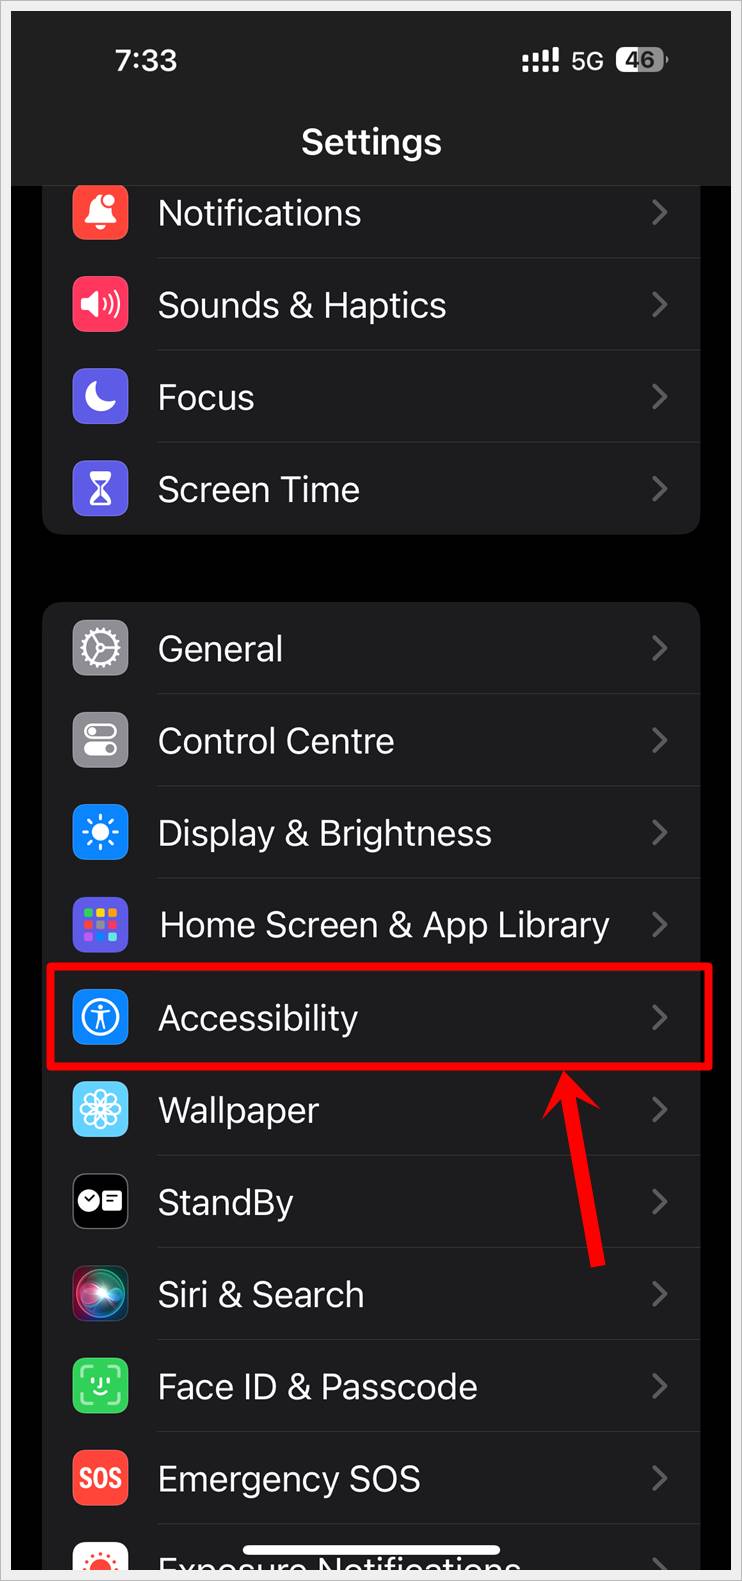 This image shows a screenshot of the 'Settings' page of an iPhone with the 'Accessibility' option highlighted.